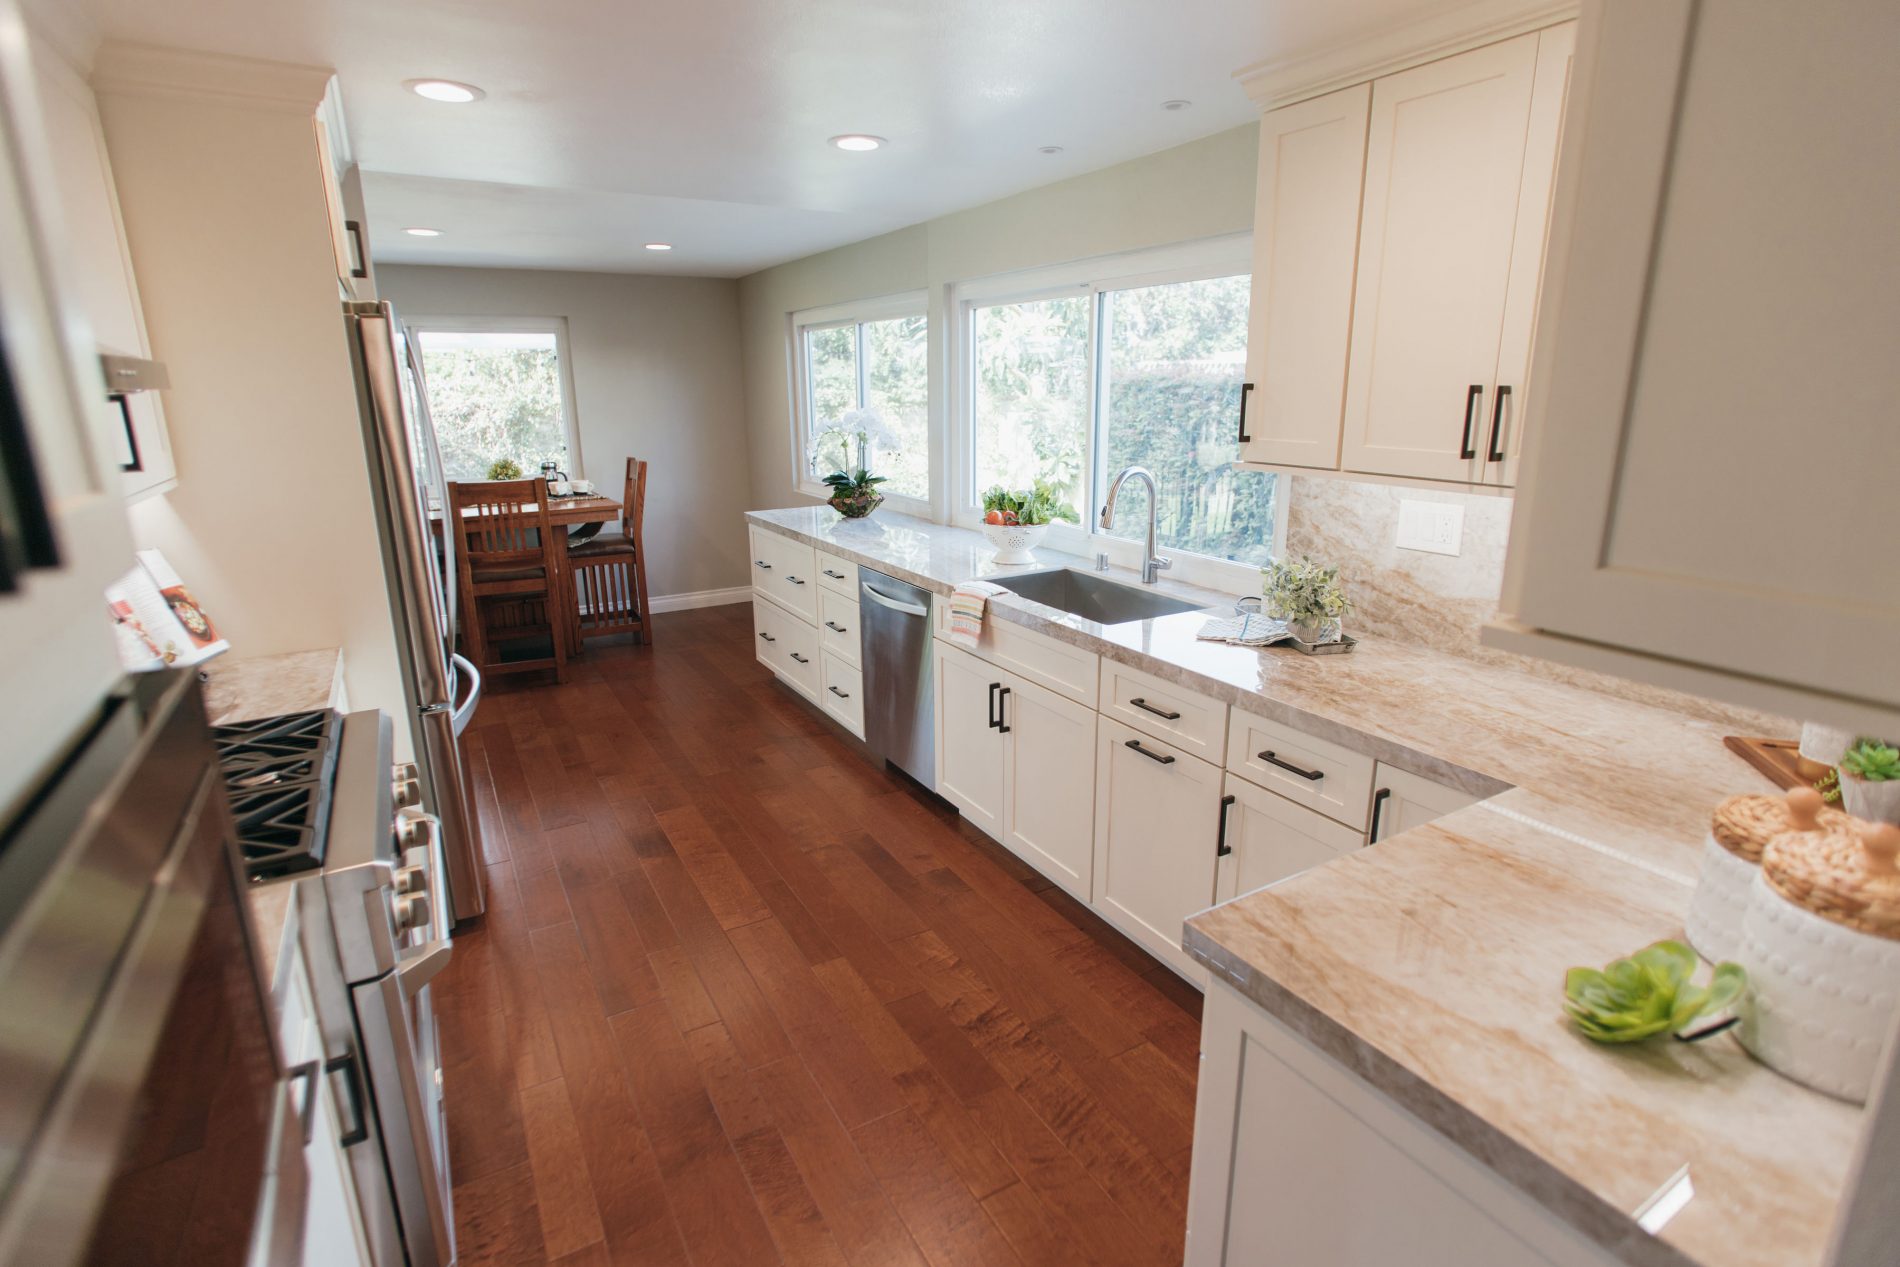 Seneca contemporary galley kitchen with white cabinets, stone counter and backsplash, stainless appliances, wood laminate floor.